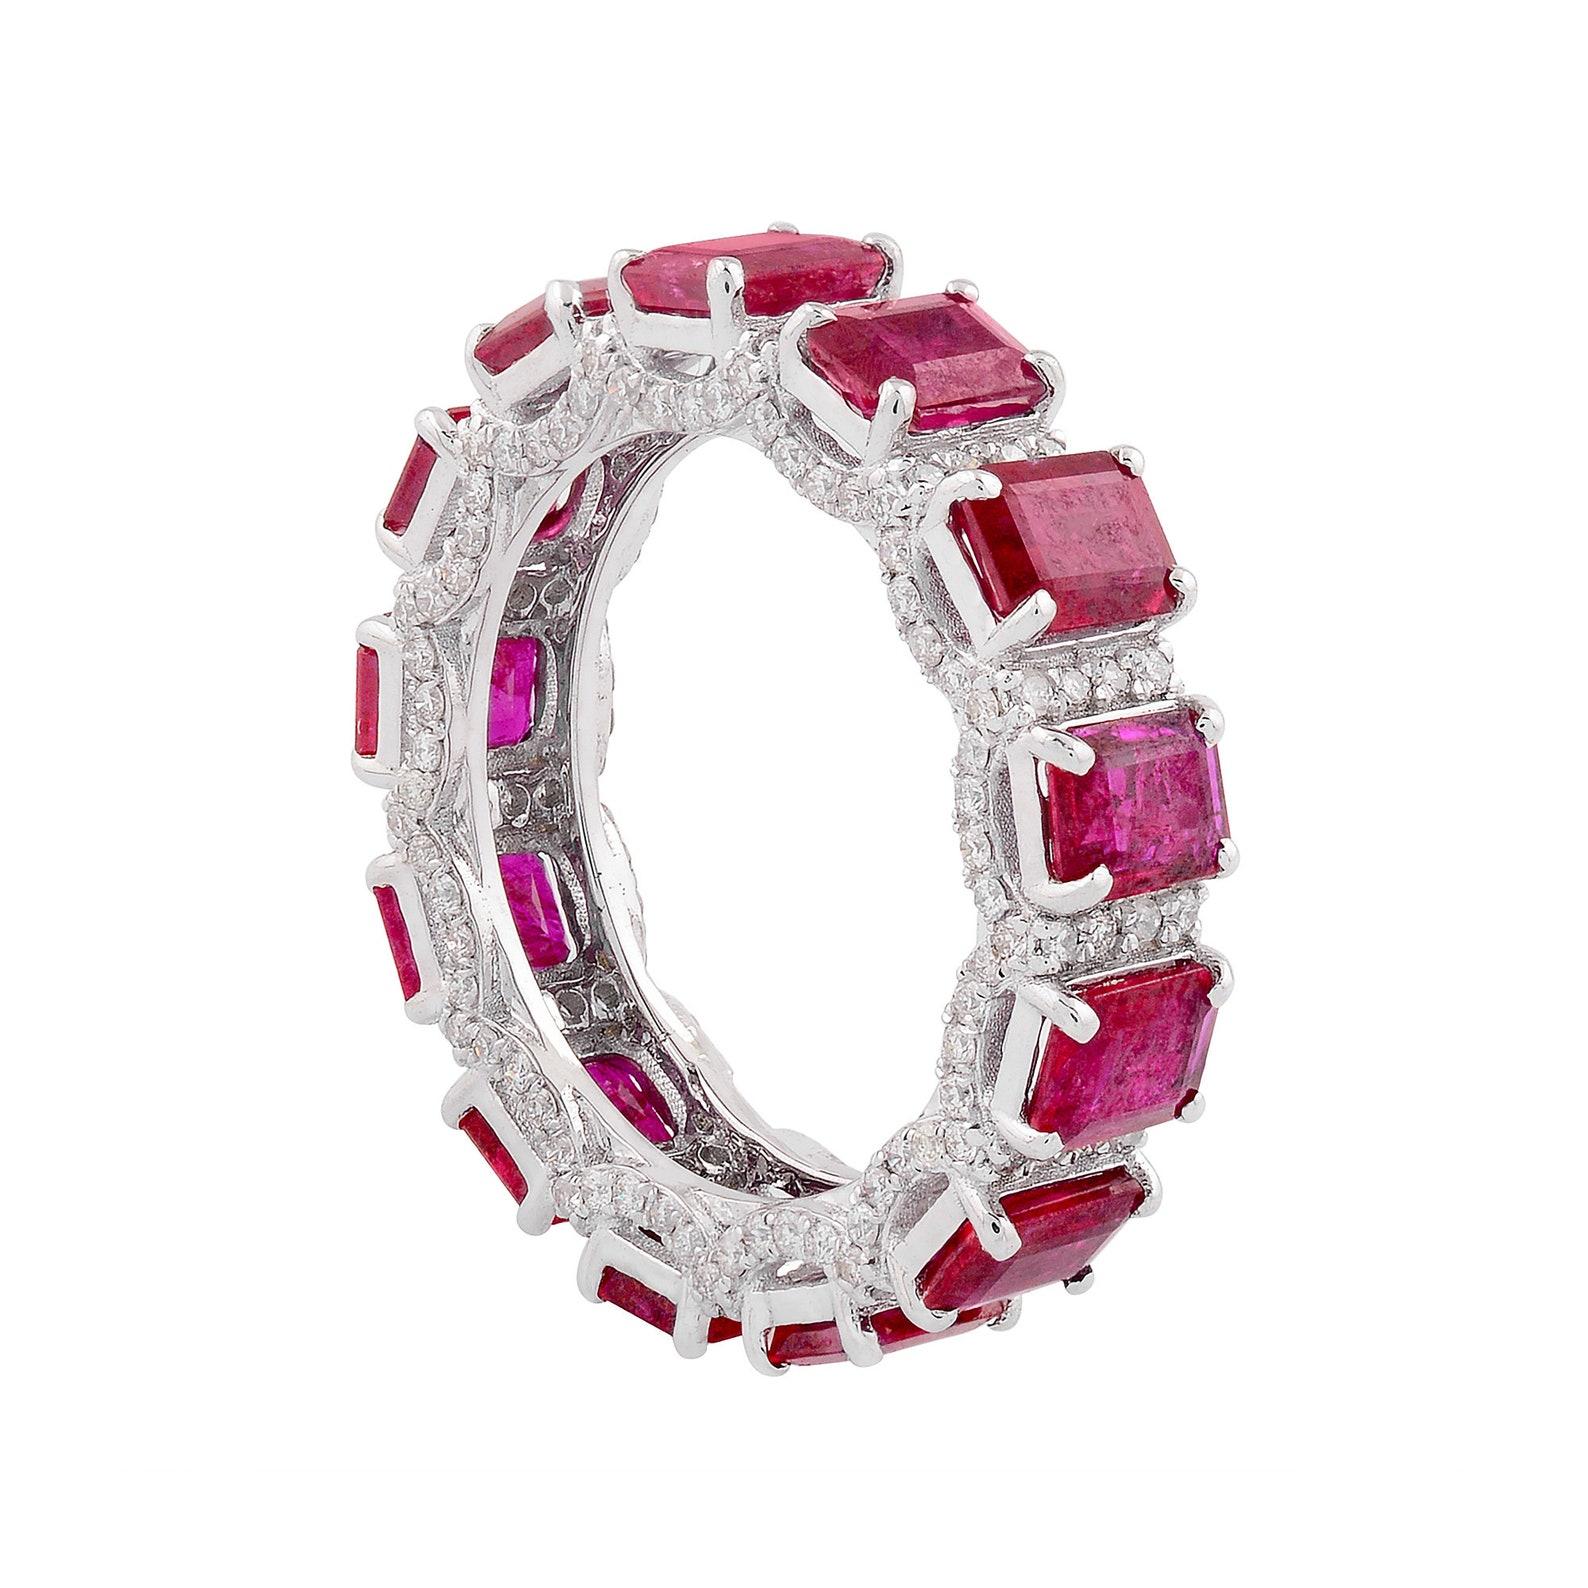 This ring has been meticulously crafted from 14-karat gold.  It is hand set with 5.96 carats ruby & .93 carats of sparkling diamonds. 

The ring is a size 7 and may be resized to larger or smaller upon request. 
FOLLOW  MEGHNA JEWELS storefront to